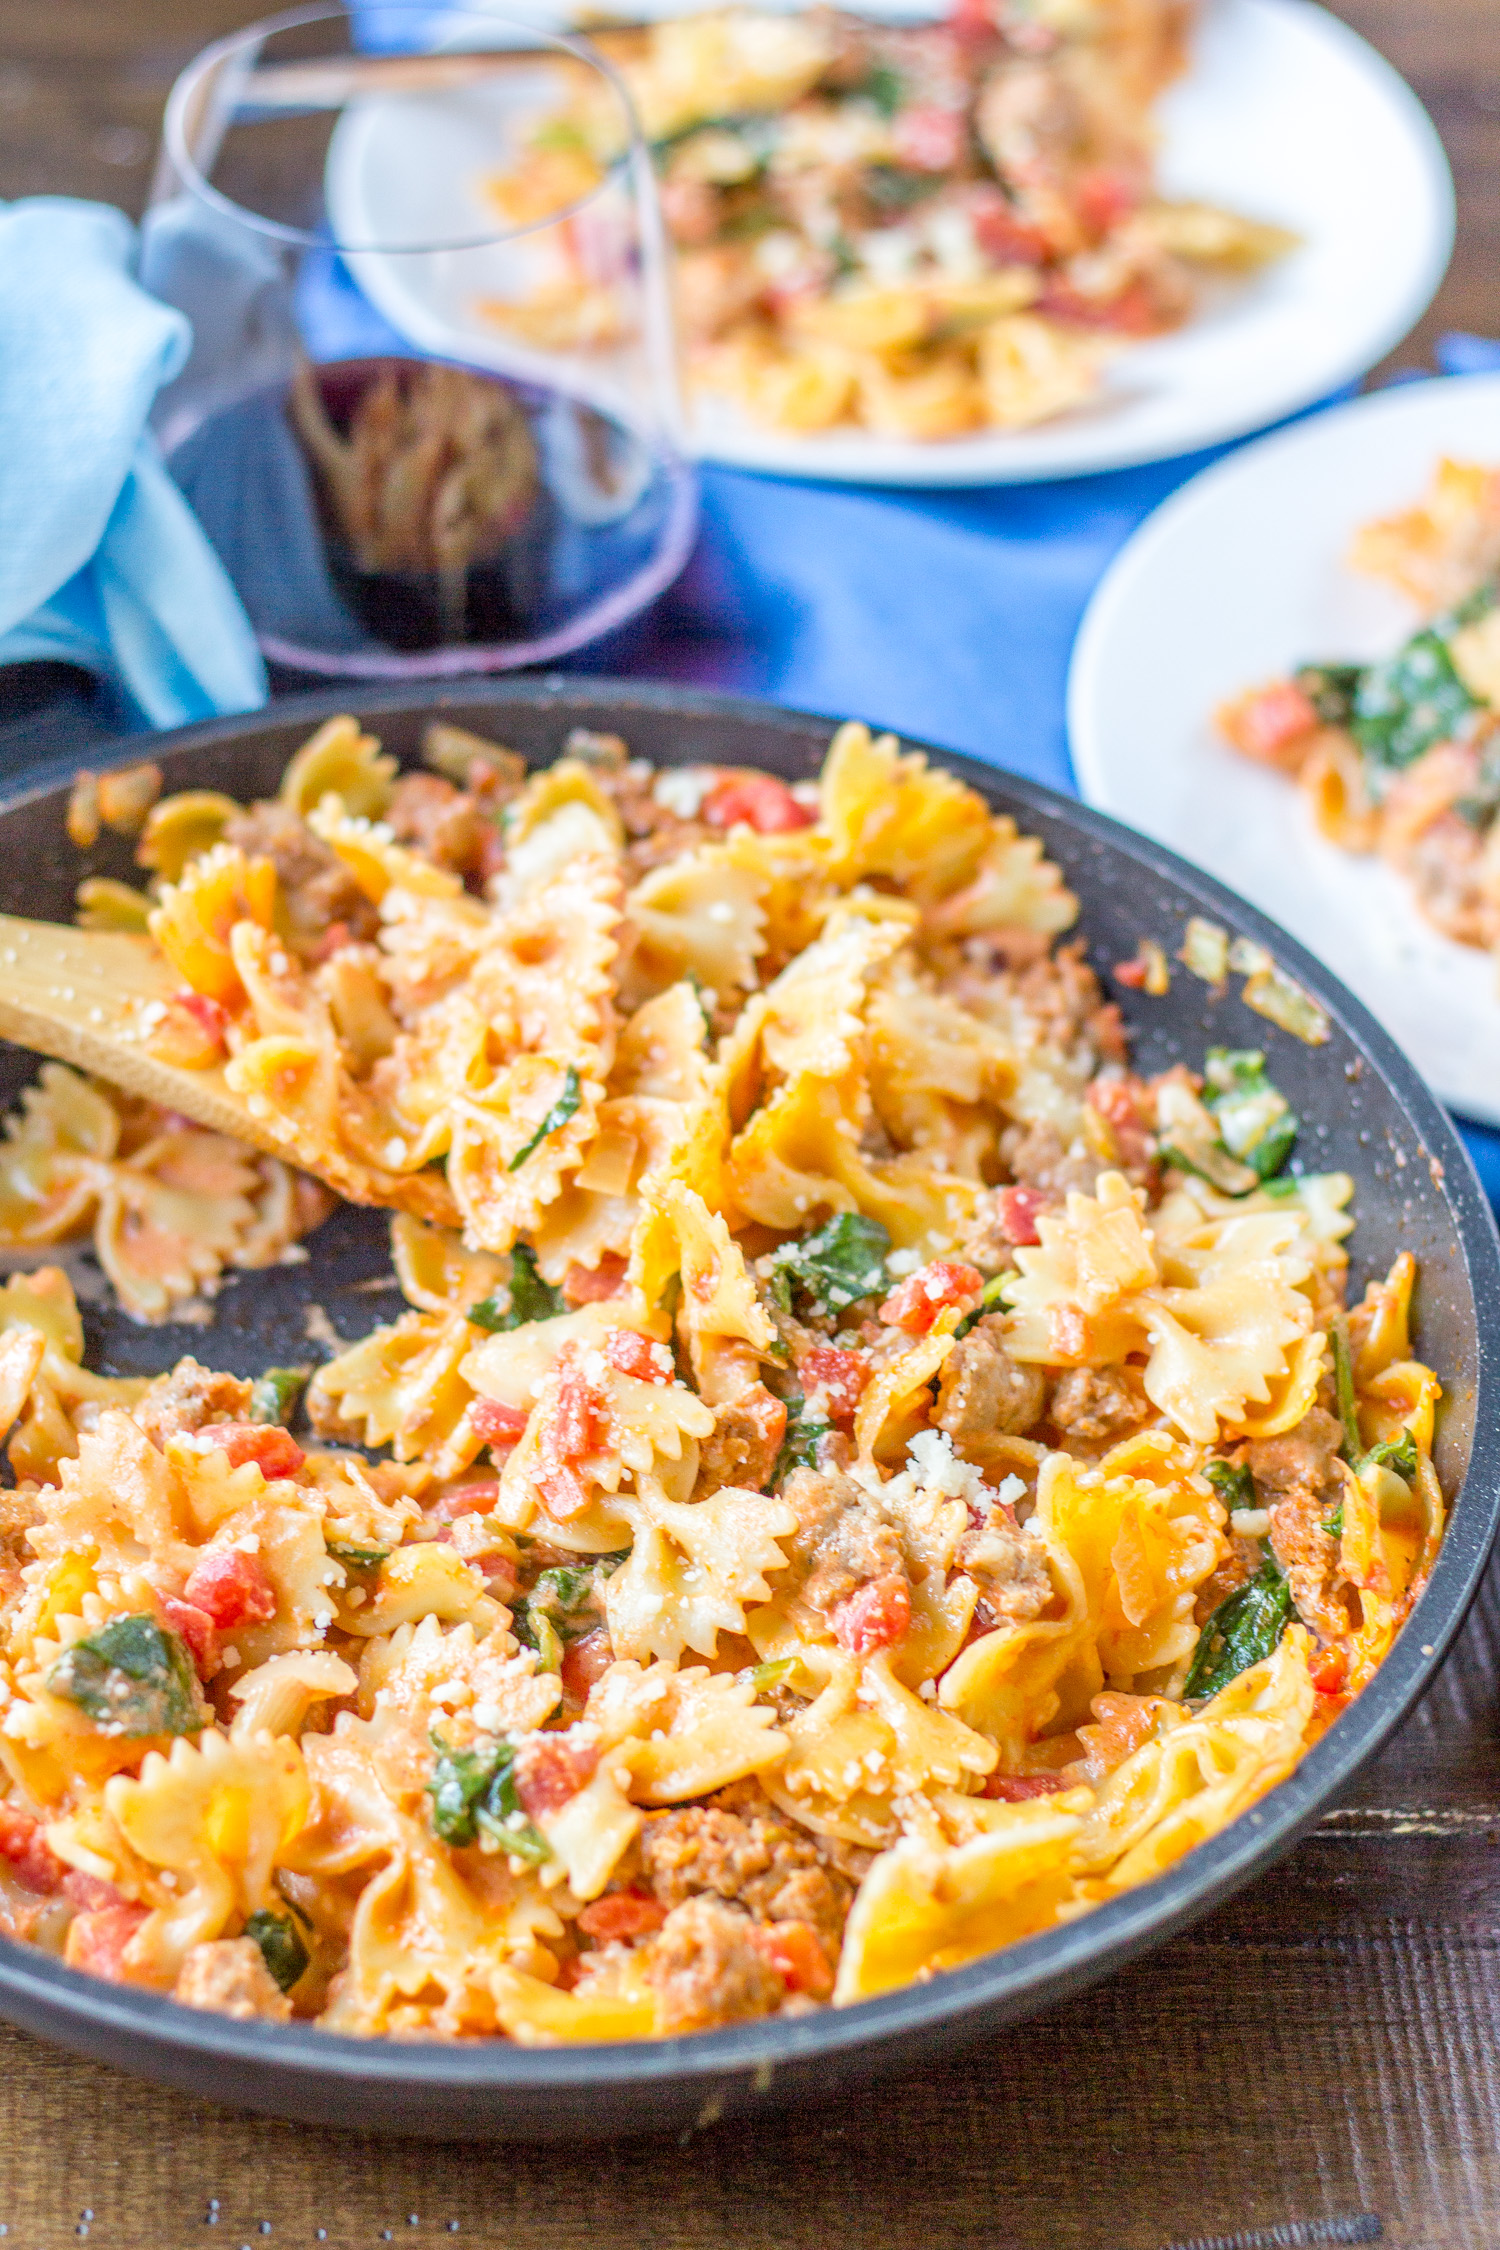 Sweet And Spicy Sausage And Farfalle A 20 Minute Dinner Recipe